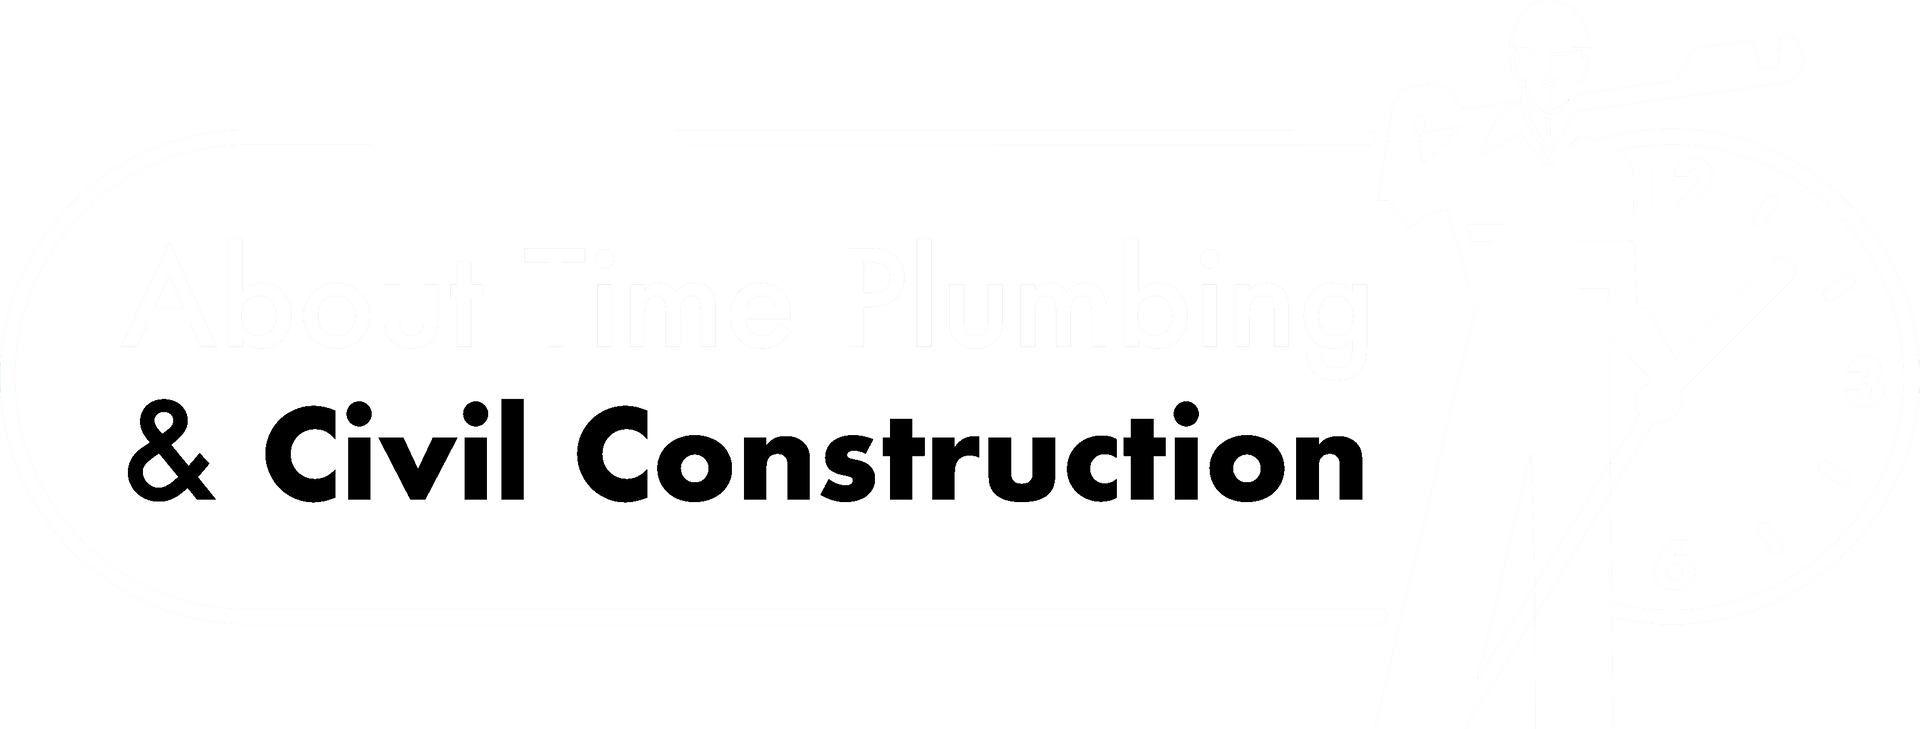 Residential & Commercial Plumbing in the Southern Highlands